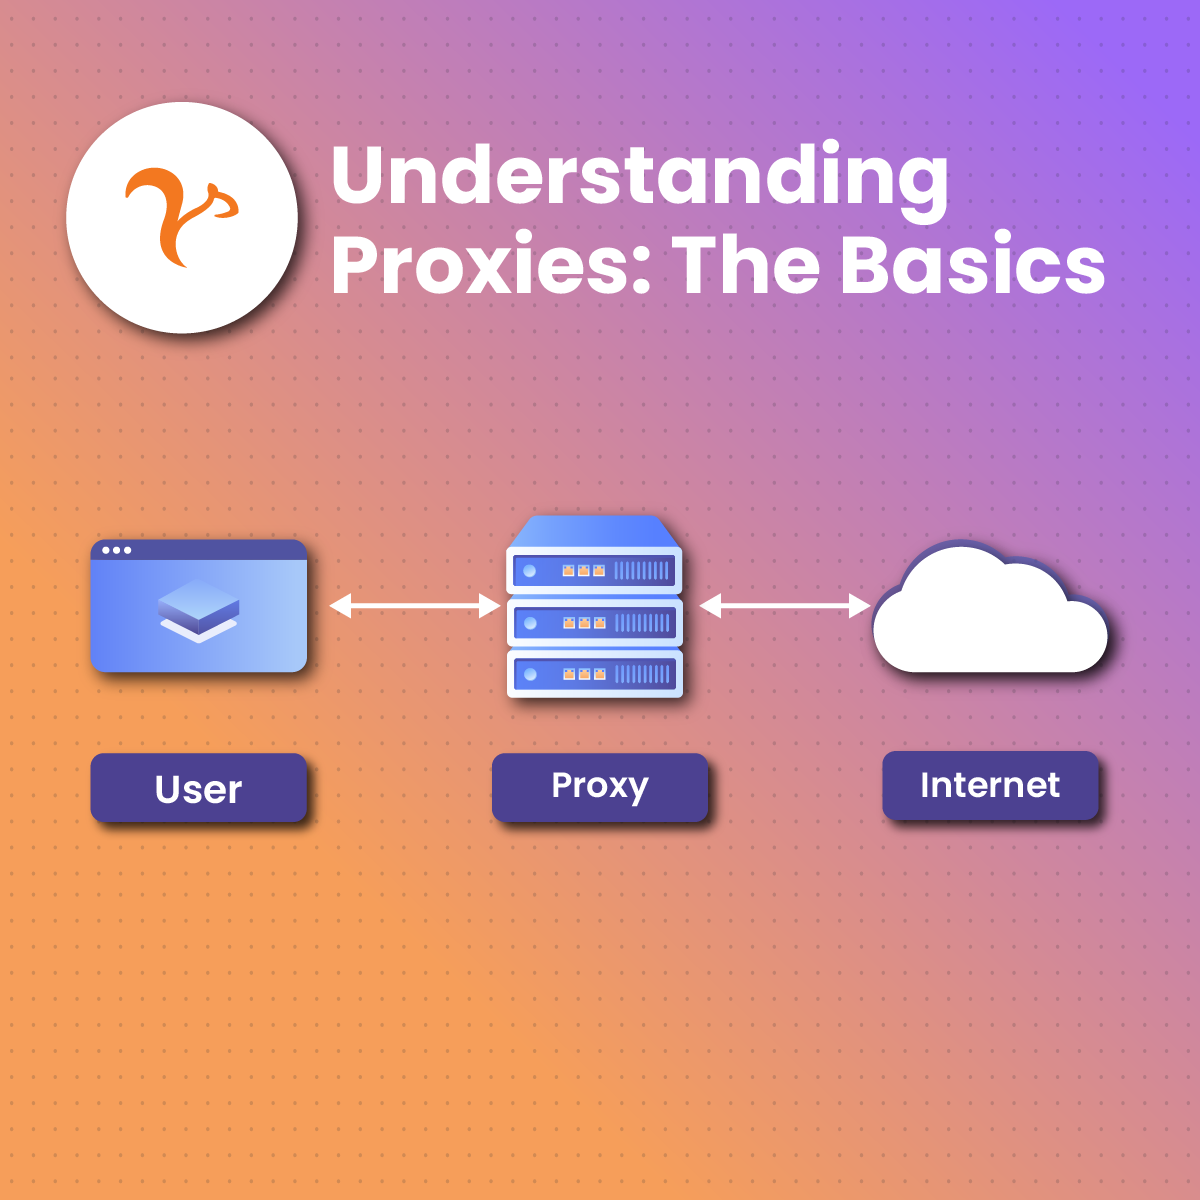 What Is A Proxy?